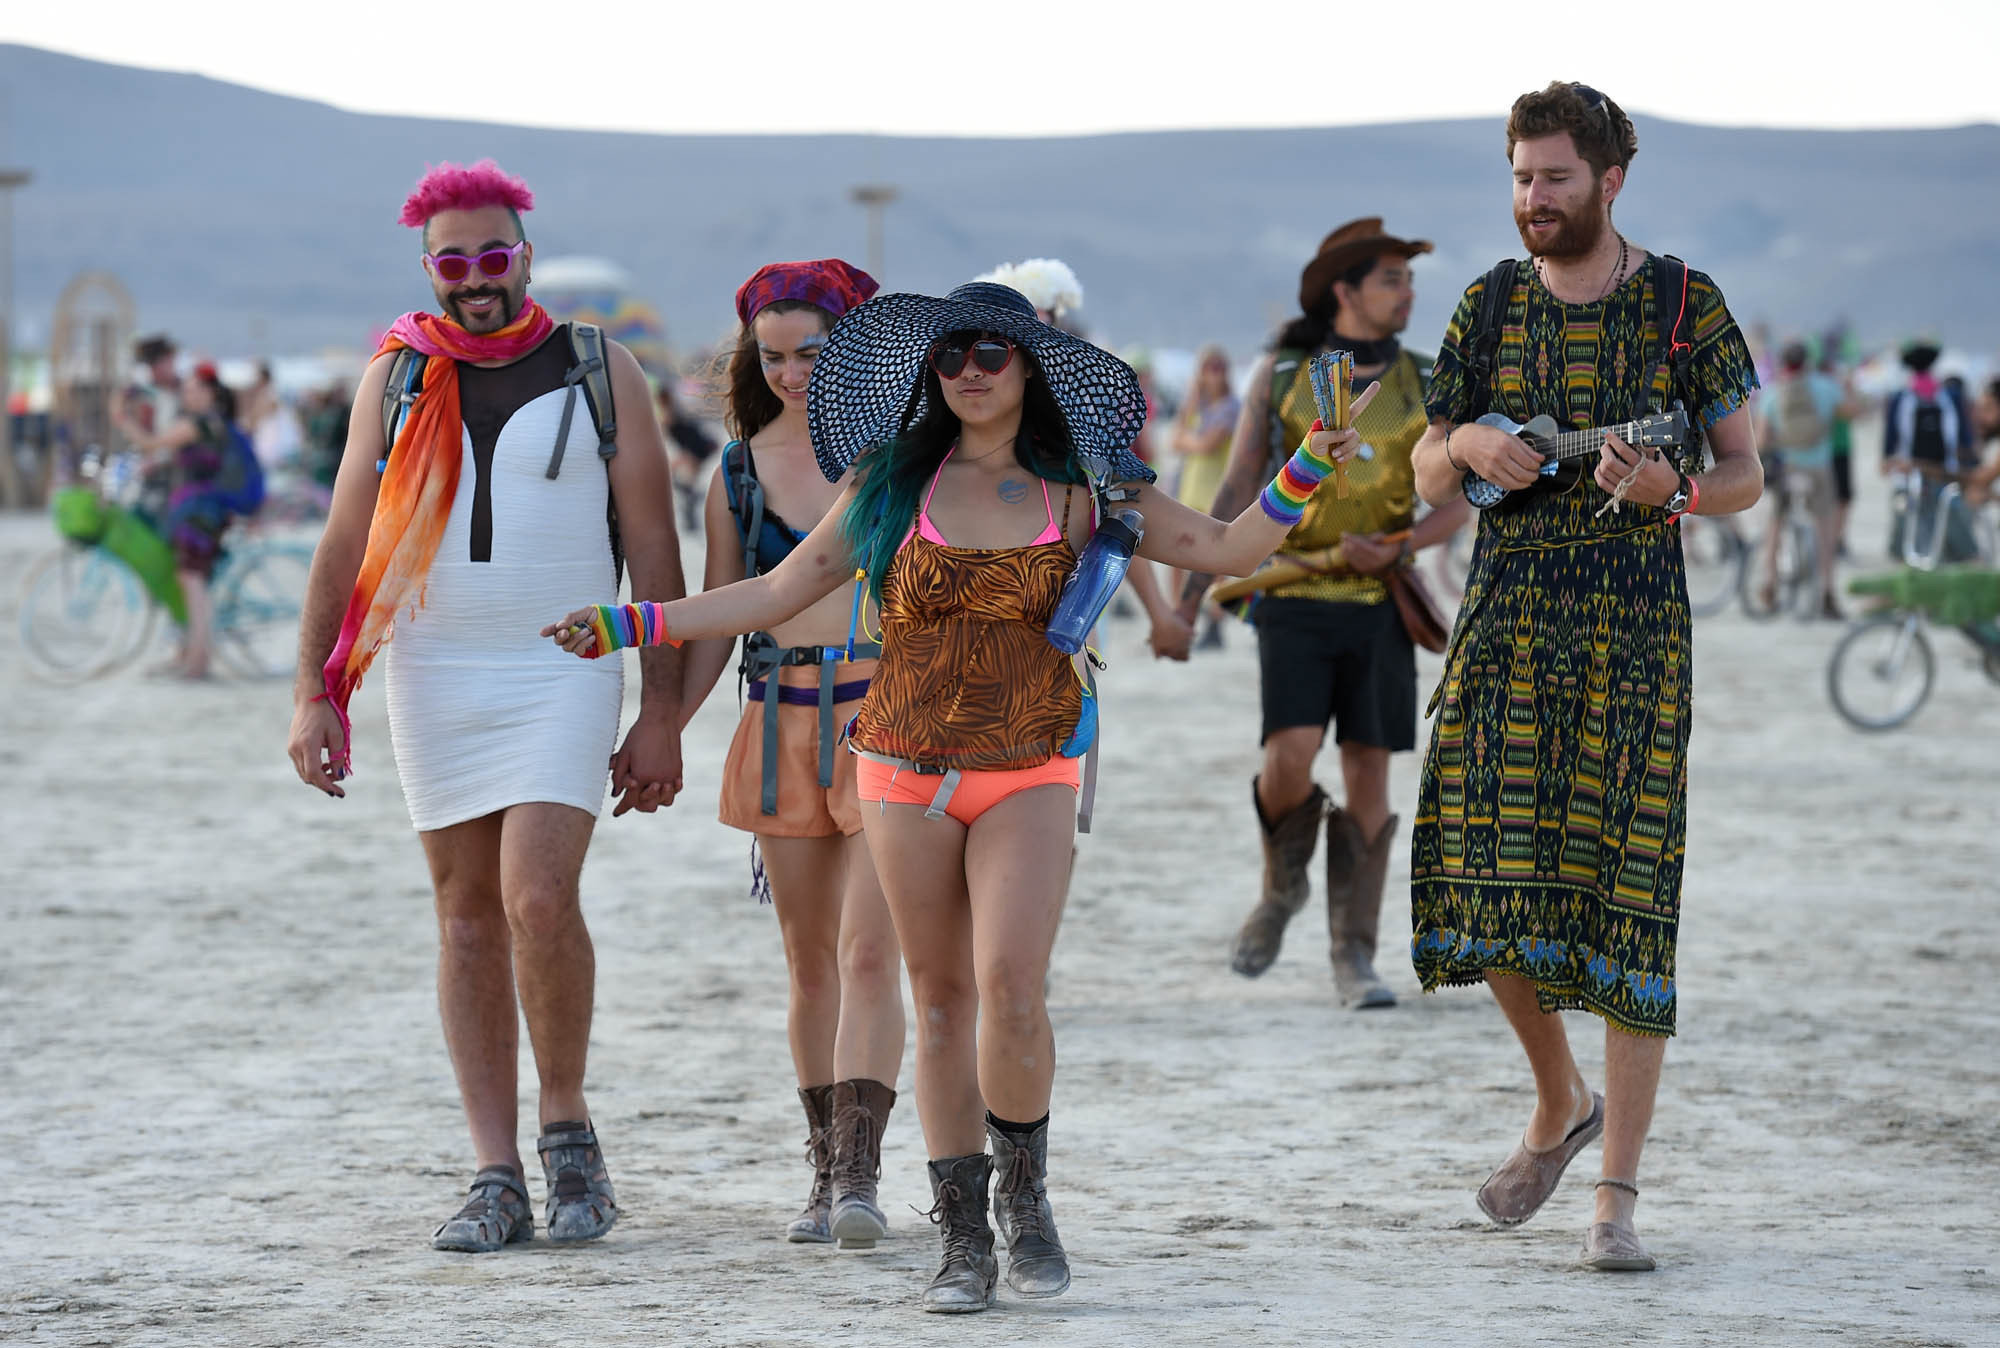 17 Facts About Burning Man